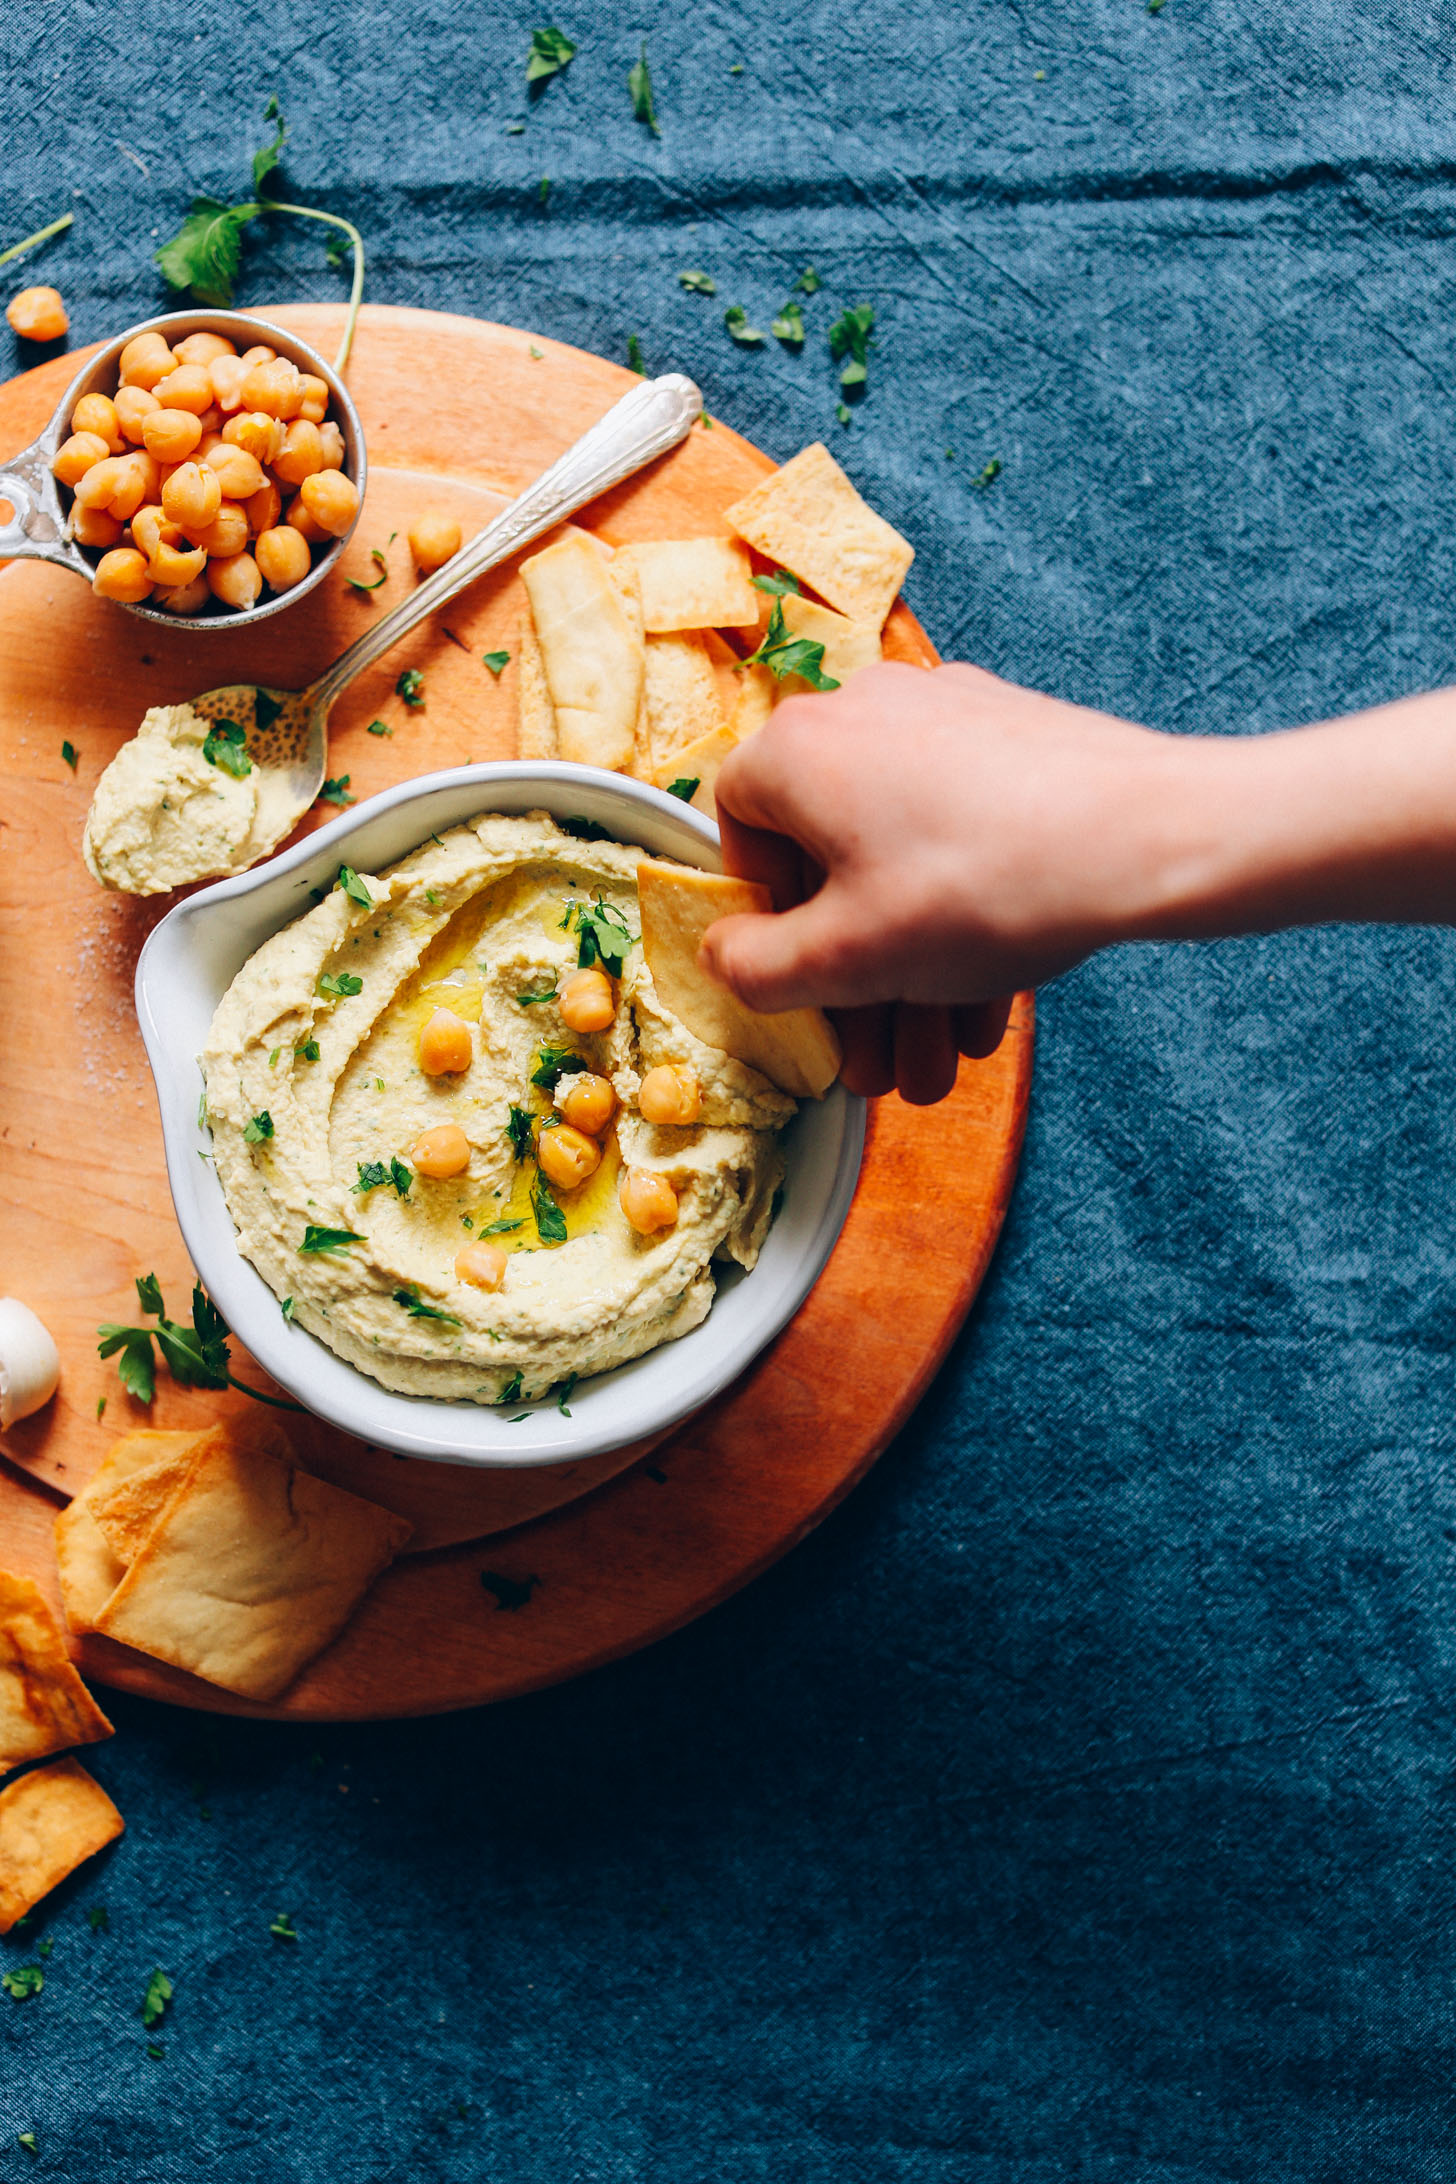 Dipping a cracker into a bowl of our homemade perfect hummus recipe